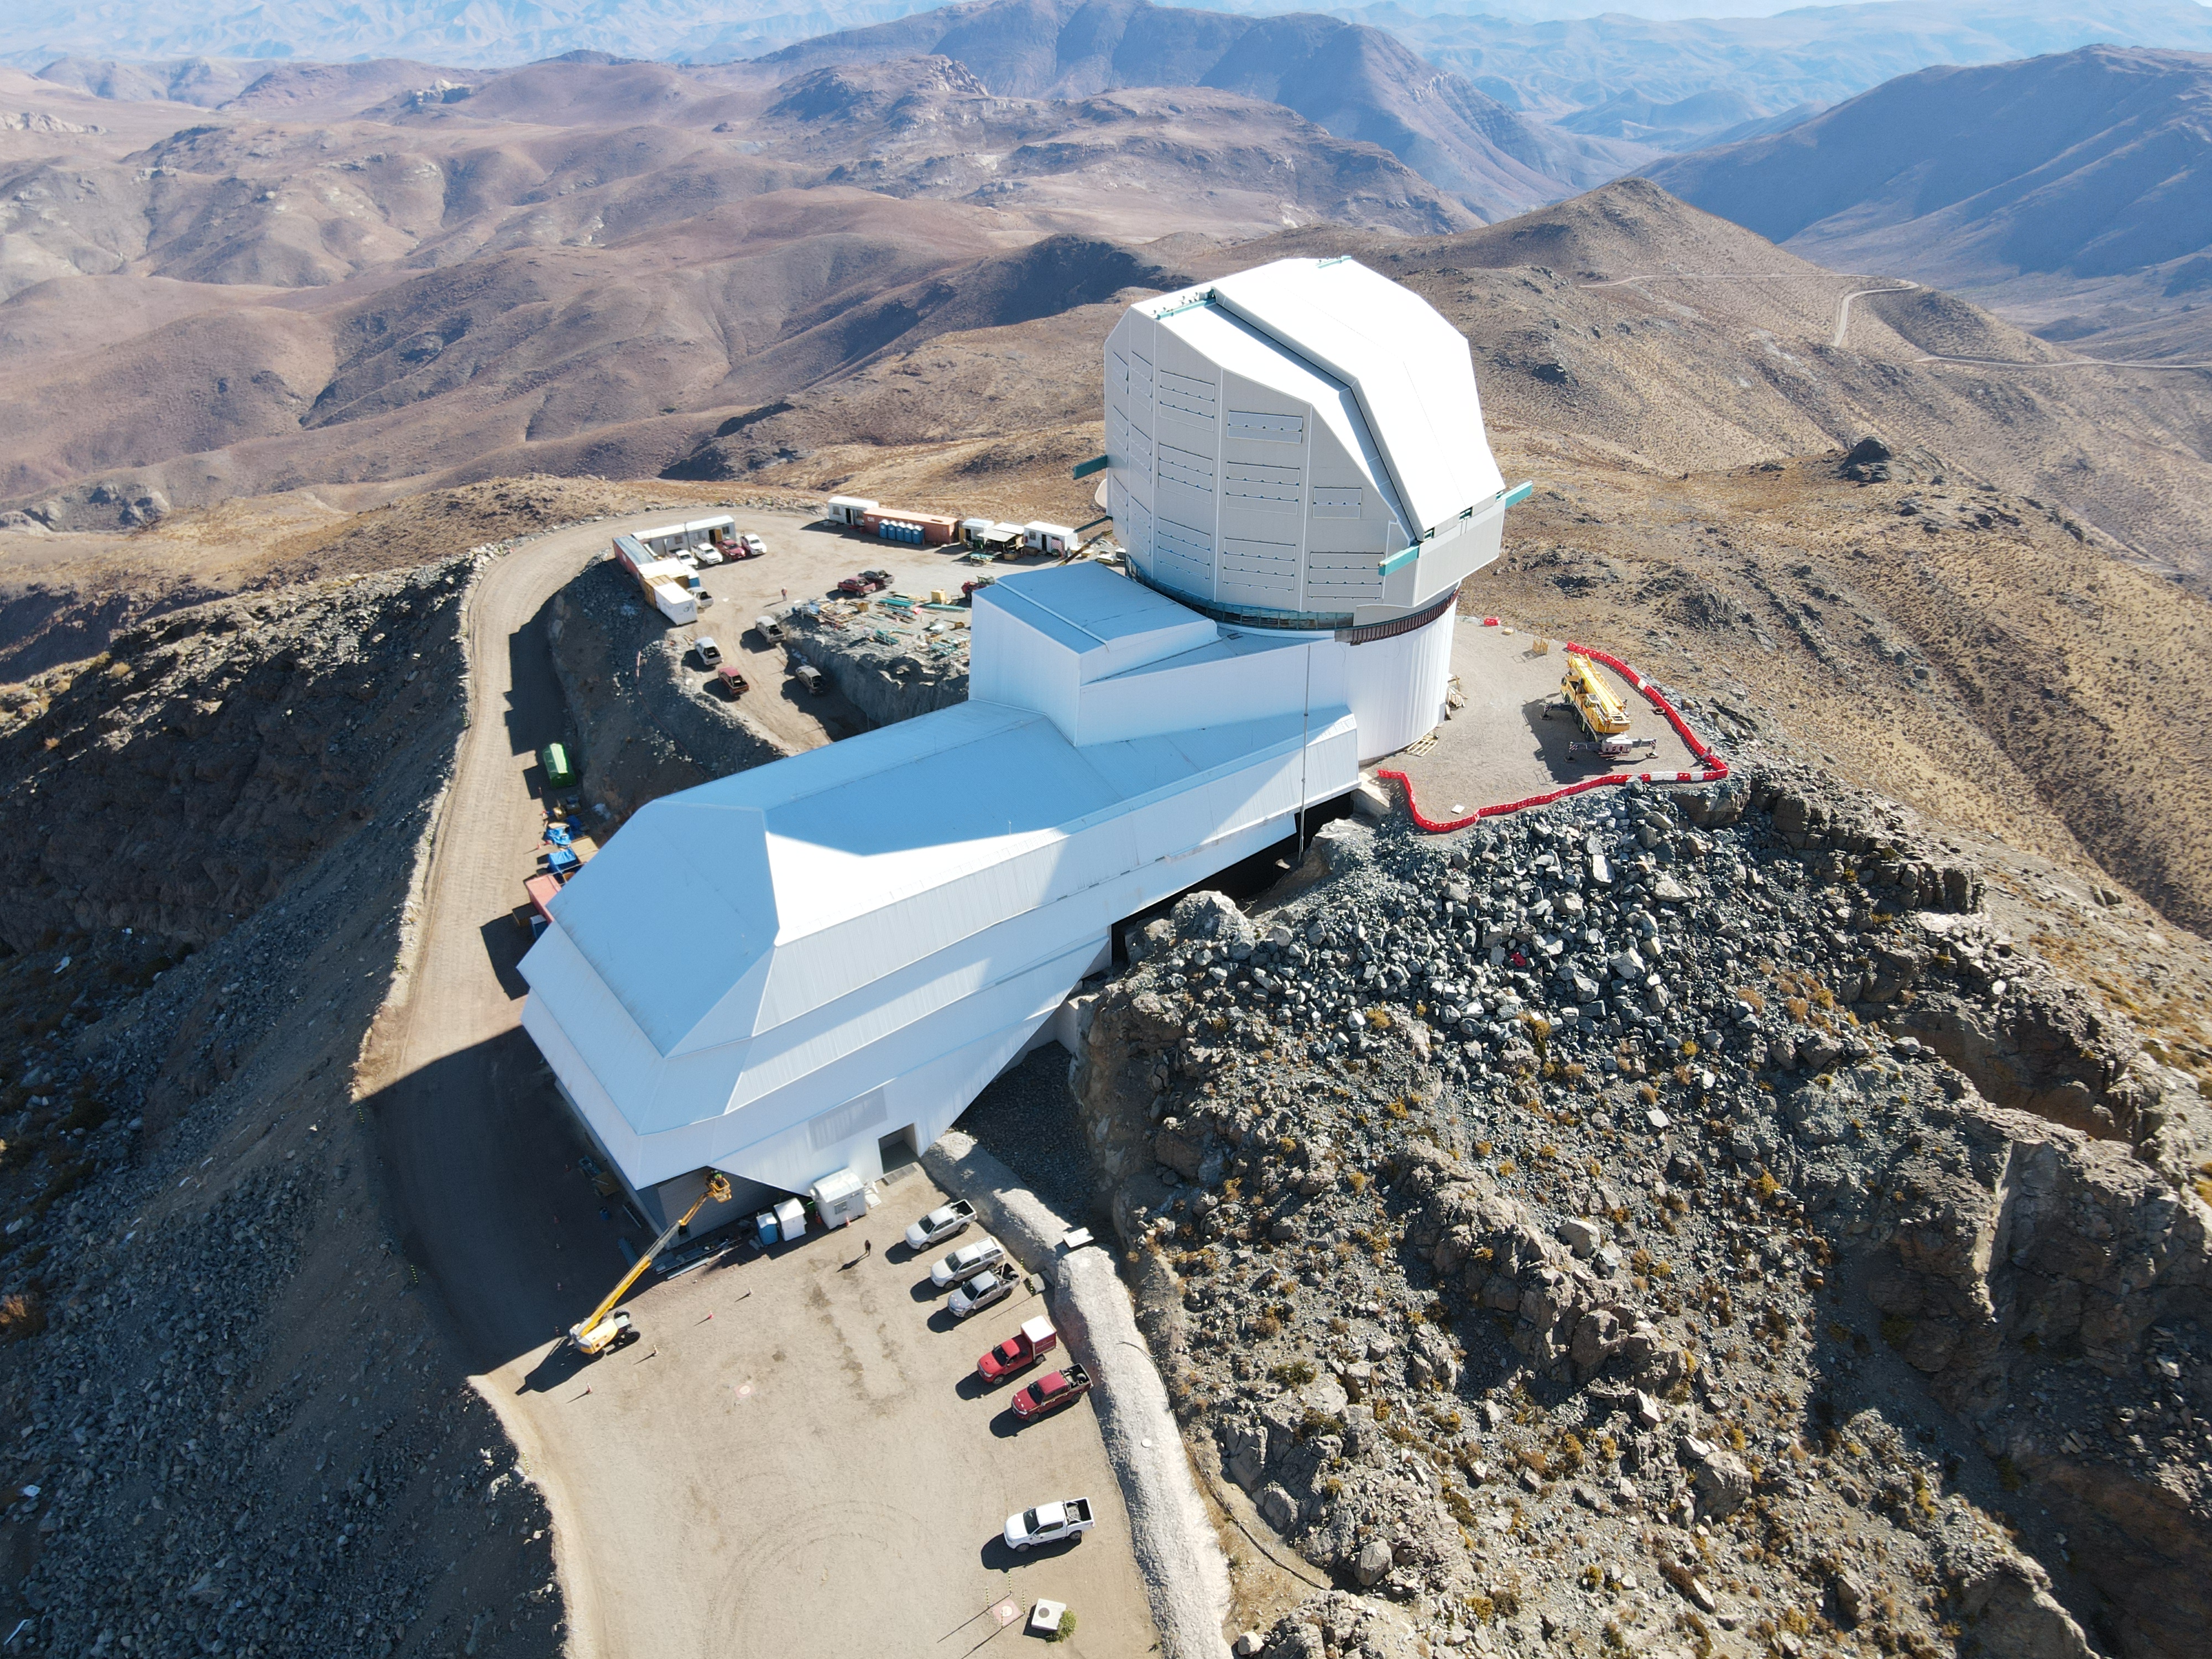 Photo of Rubin Observatory taken from above by a drone. The observatory has a white dome and a long support building that extends to the left of the dome. The observatory is on a dry, brown mountain top with other mountains stretching into the distance.